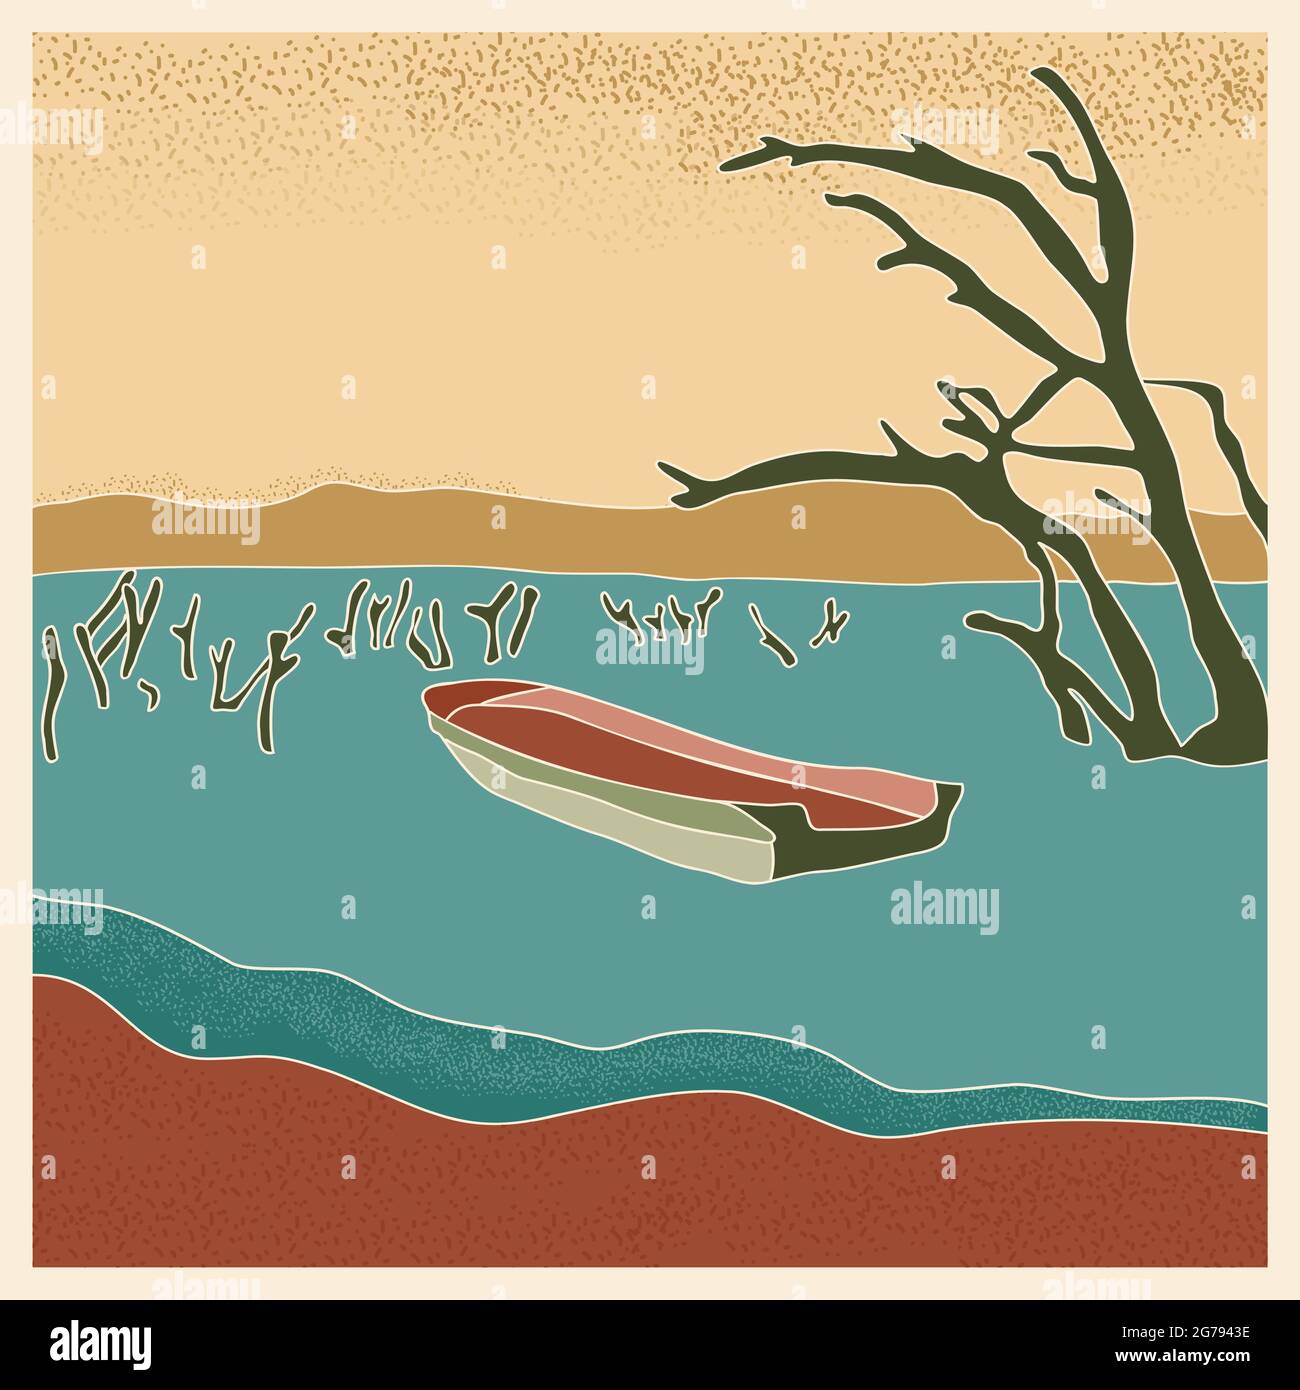 Abstract retro landscape poster. Stylized boat in lake with dry tree trunks, mountains on the horizon vector illustration with noises Stock Vector